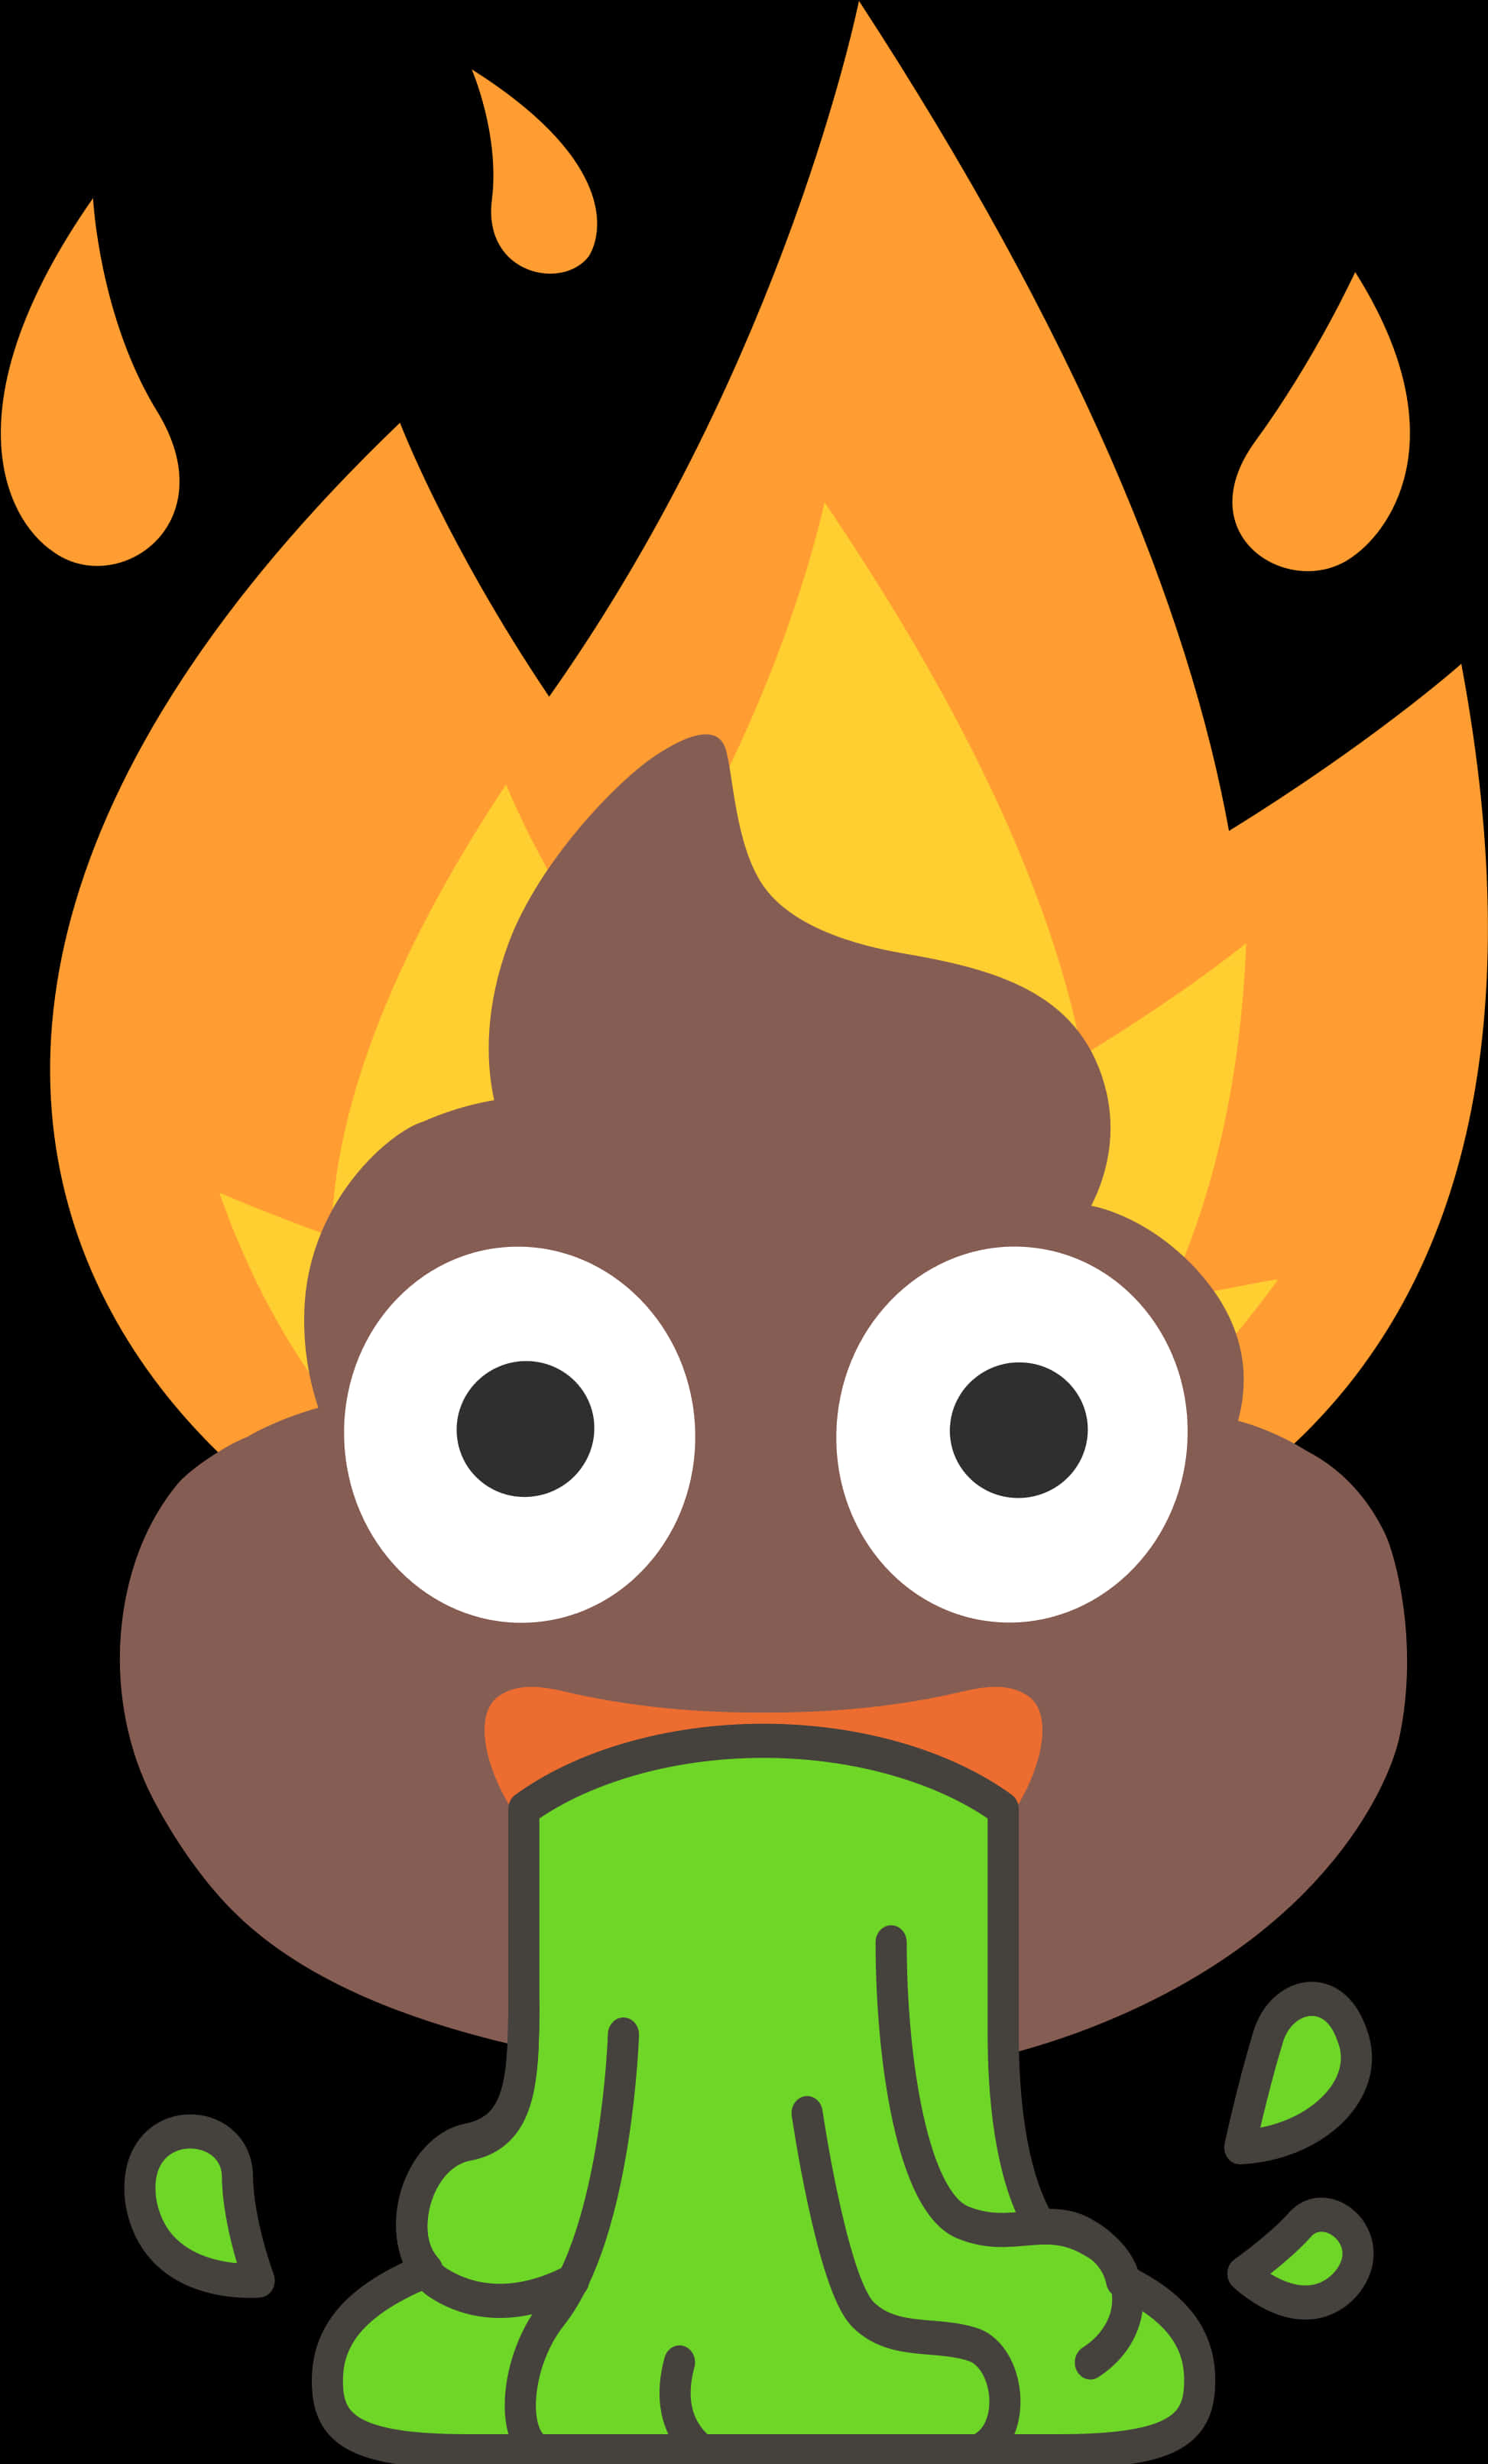 Poop Vomiting With Fire Graphic